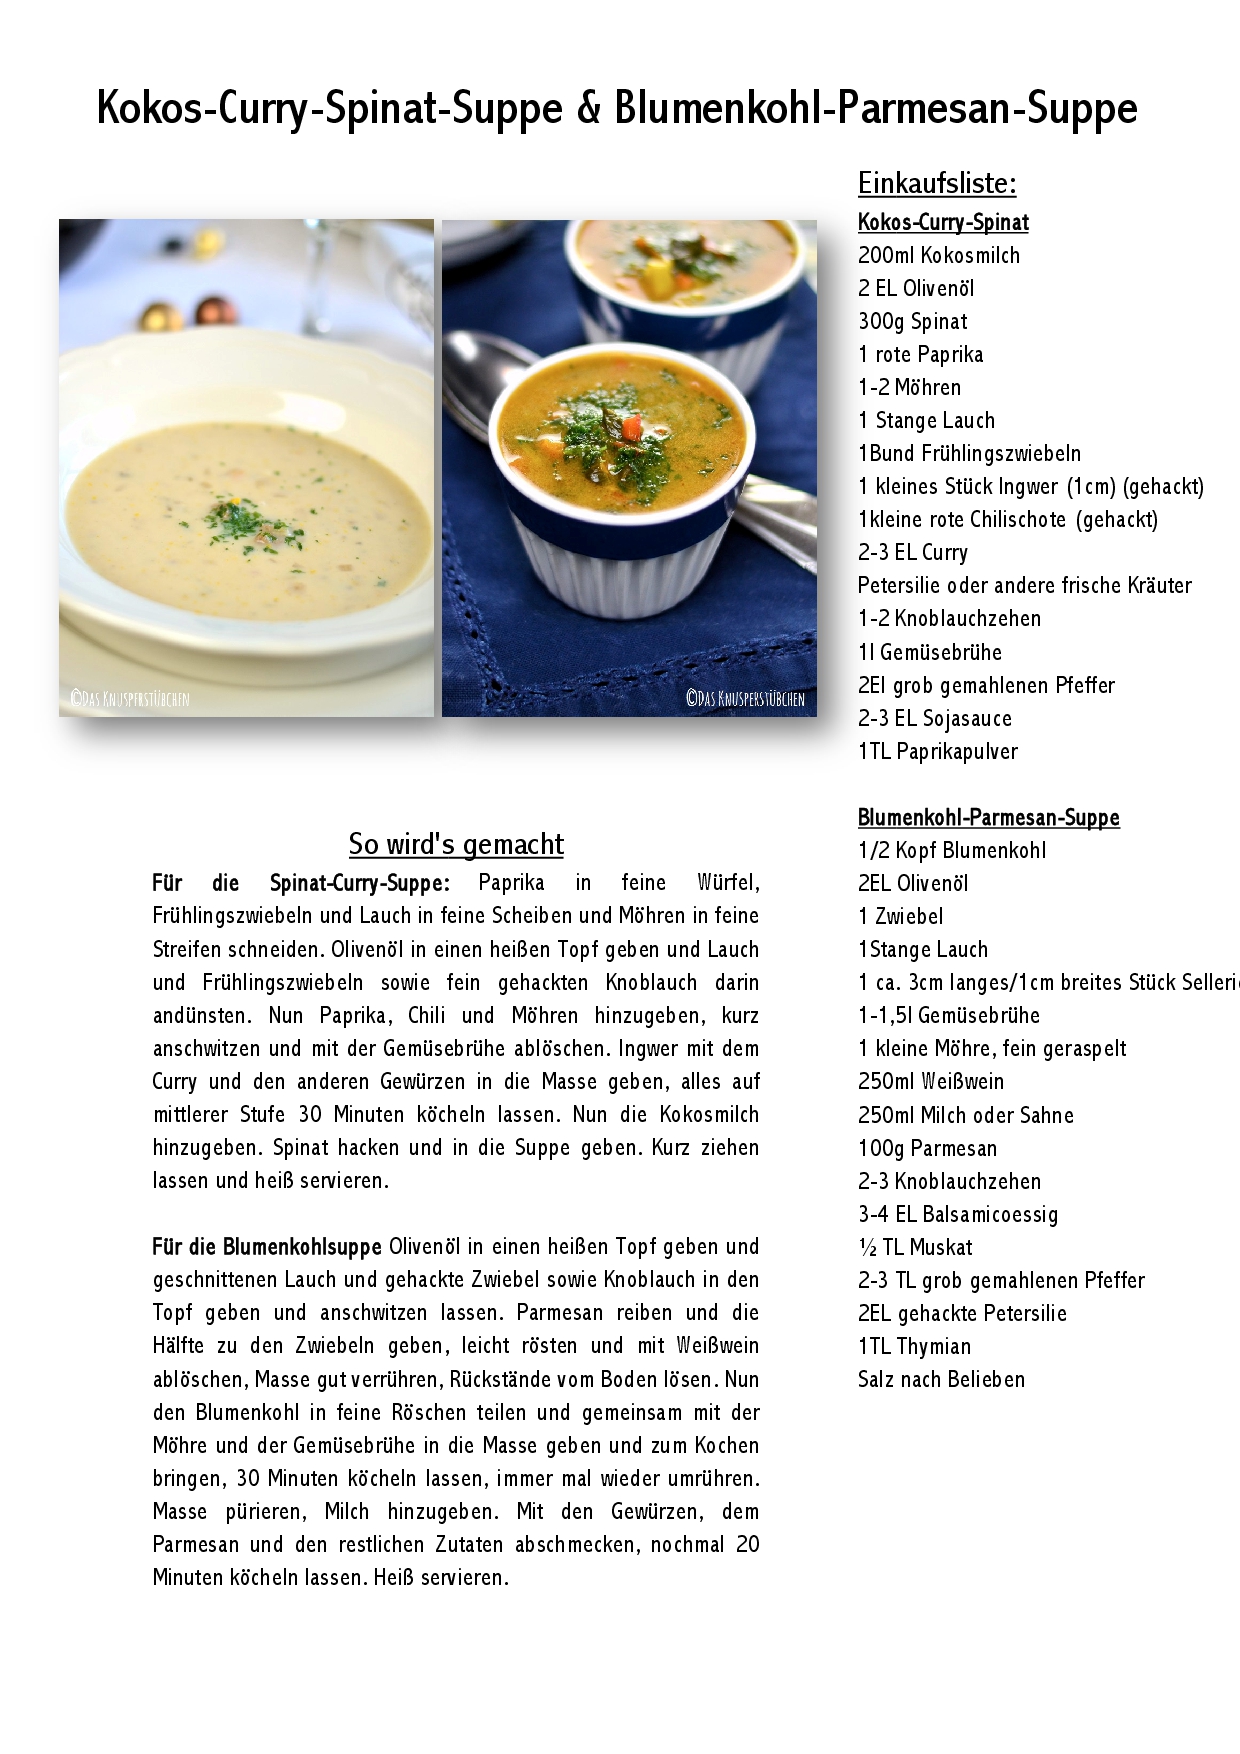 Kokos-Curry-Spinat-Suppe & Blumenkohl-Parmesan-Suppe-001